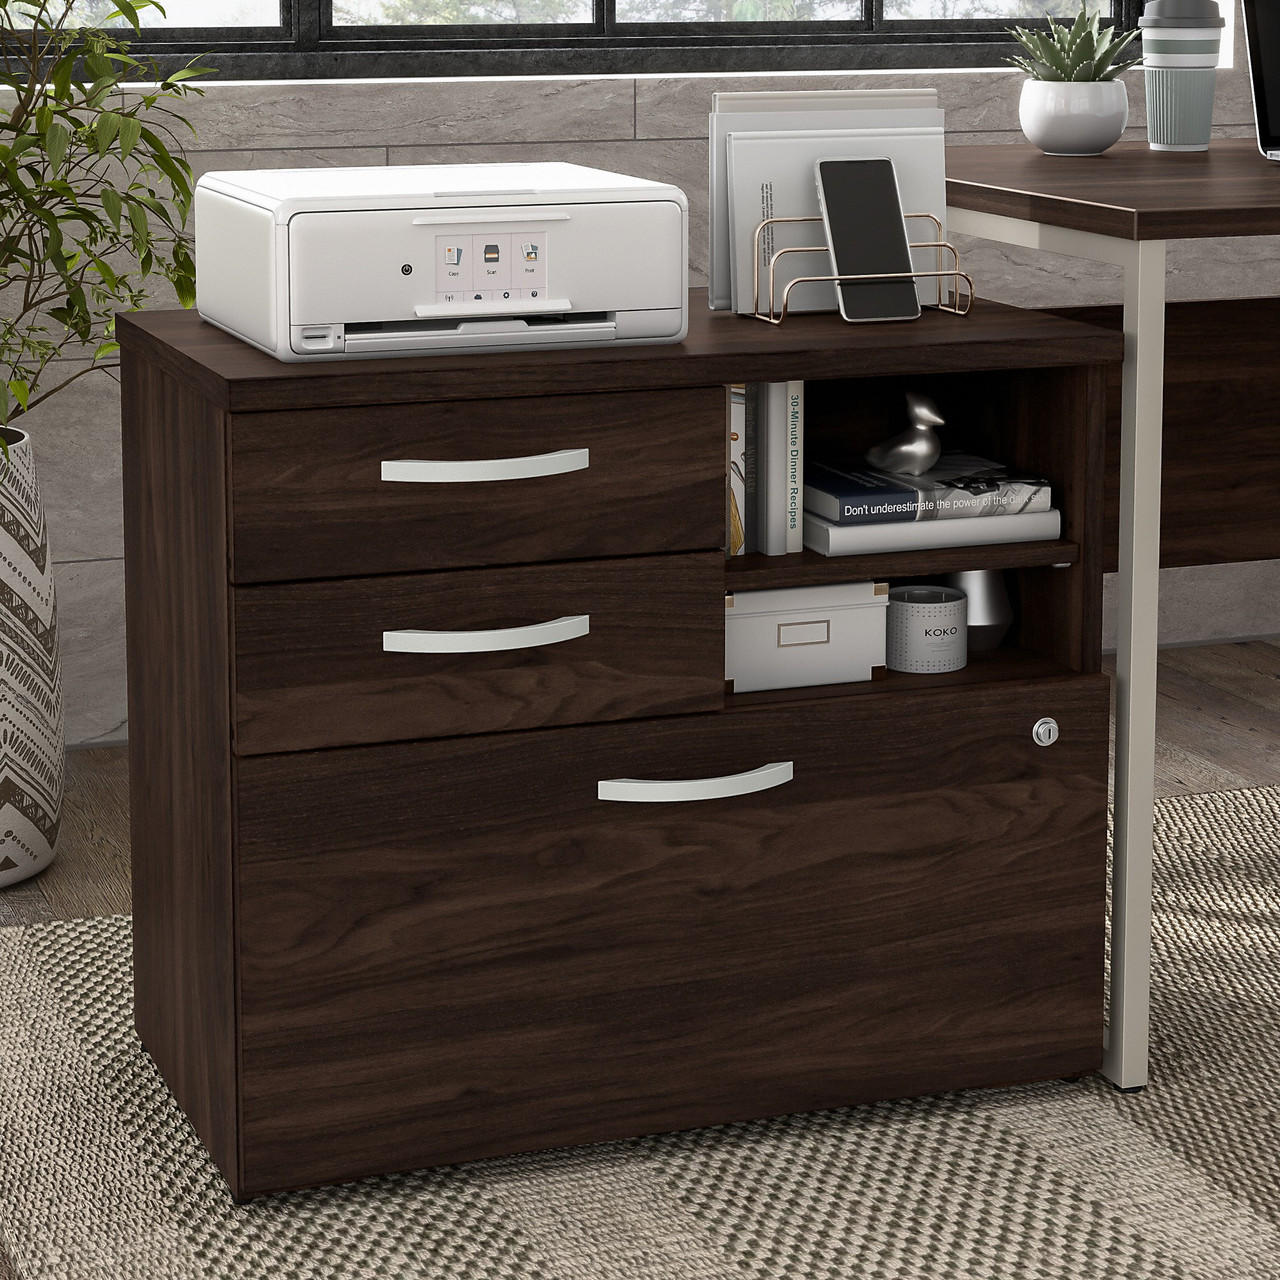  Bush Business Furniture Hybrid Office Storage Cabinet with Drawers and Shelves 